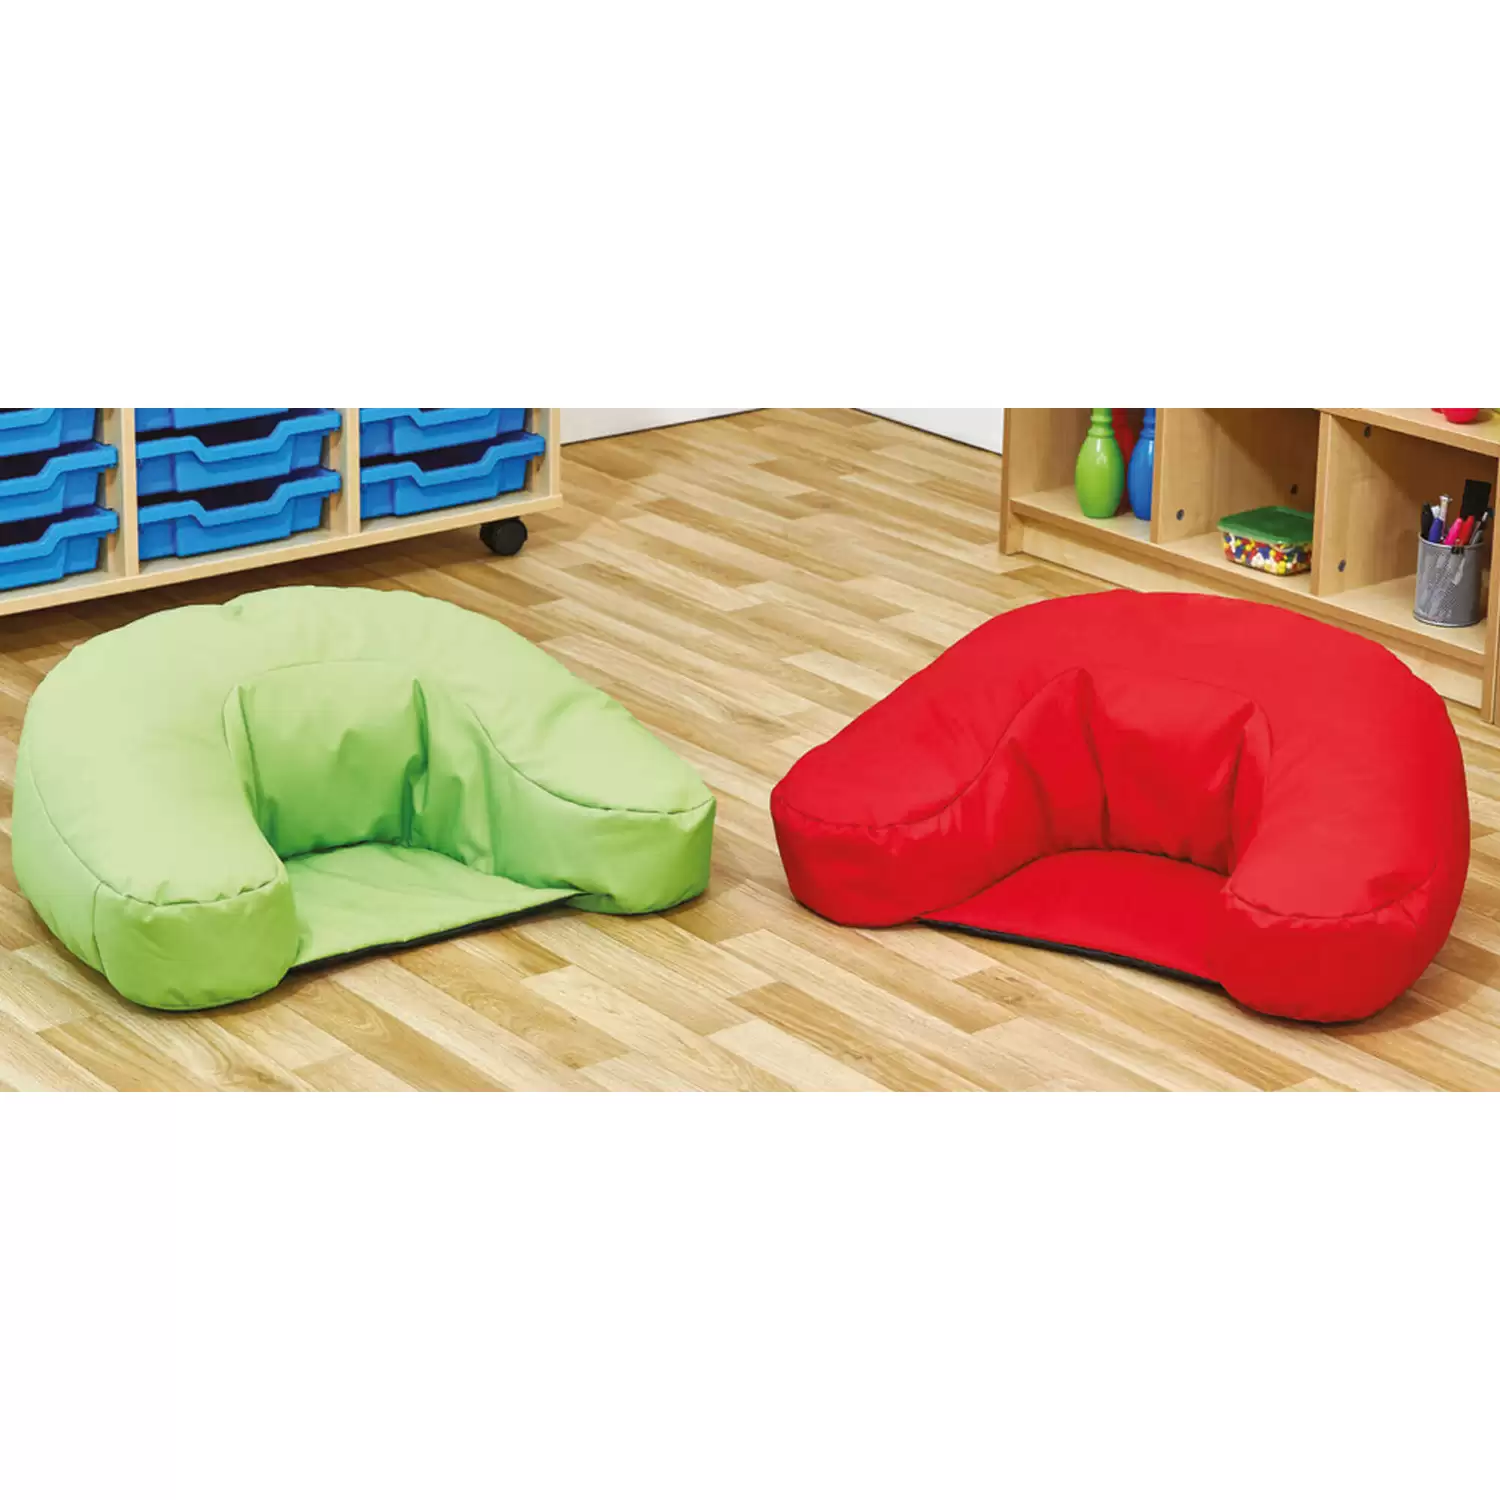 Best Fabric For Bean Bags (Toss and Chairs)